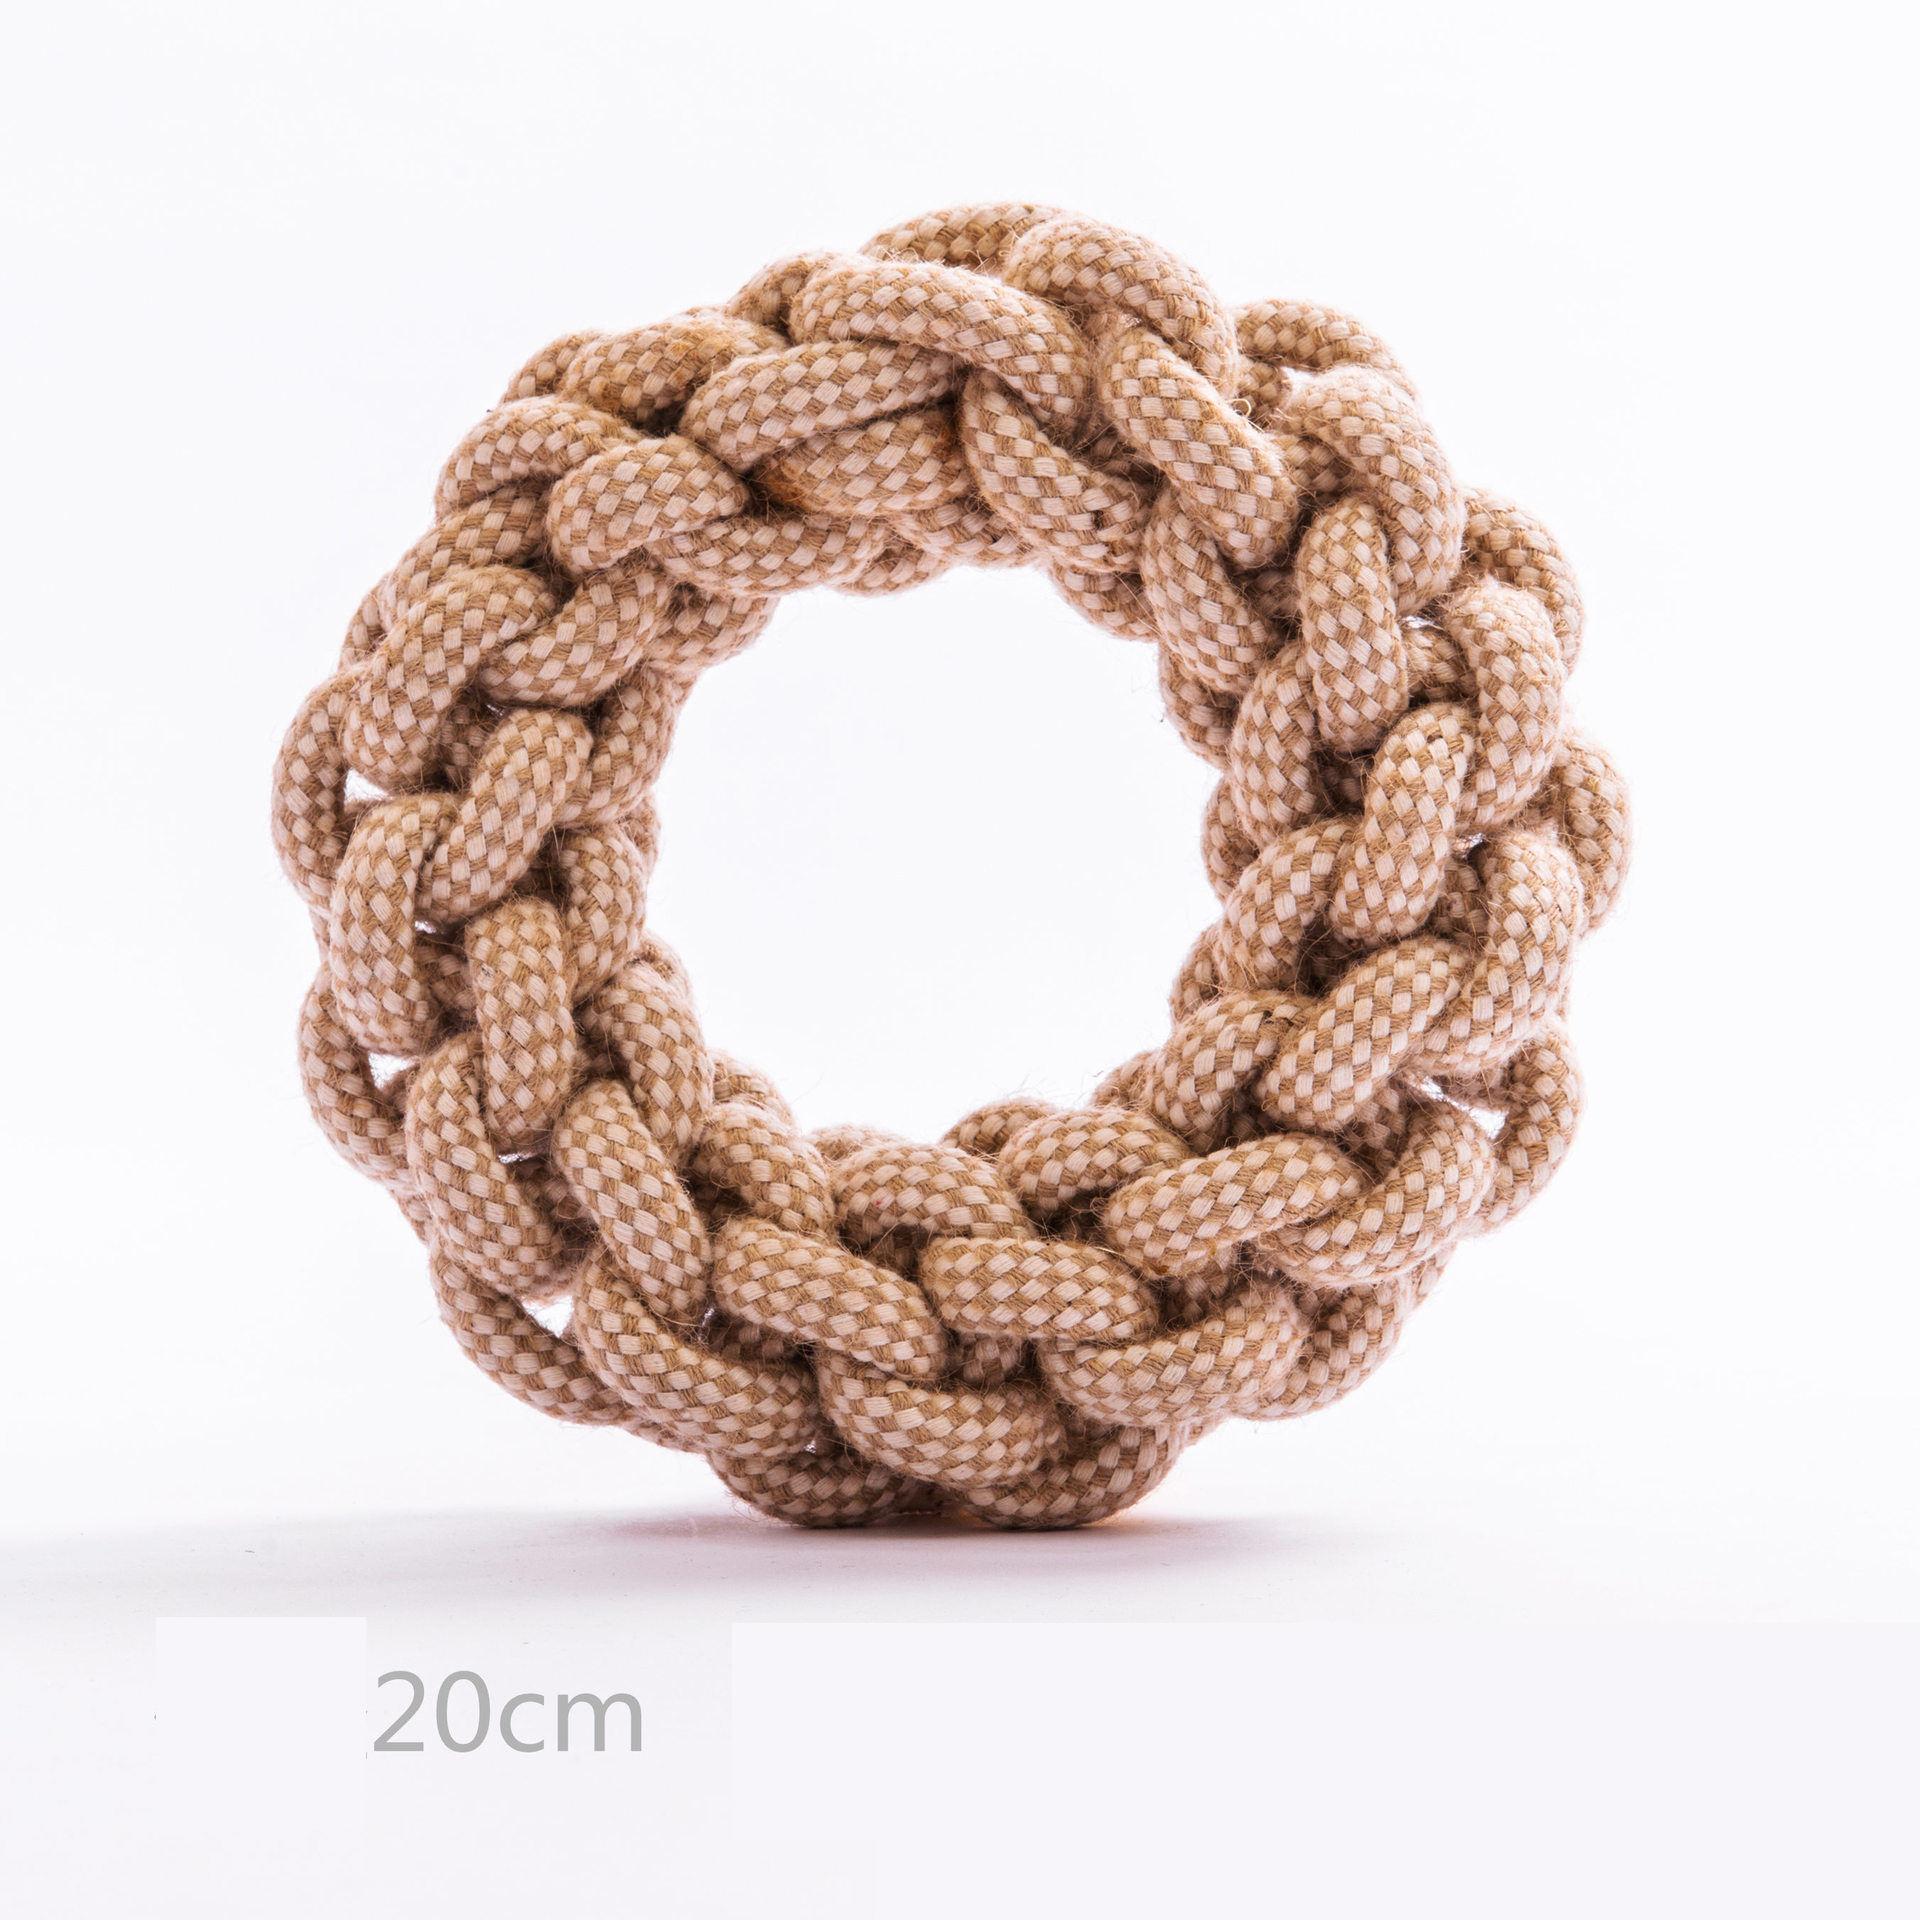 Wholesale Good Price Multi Set Eco Gray Pet Cotton Rope Knot Interactive Dog Toy Ball Pet Toy Set Chew Toys For Dog